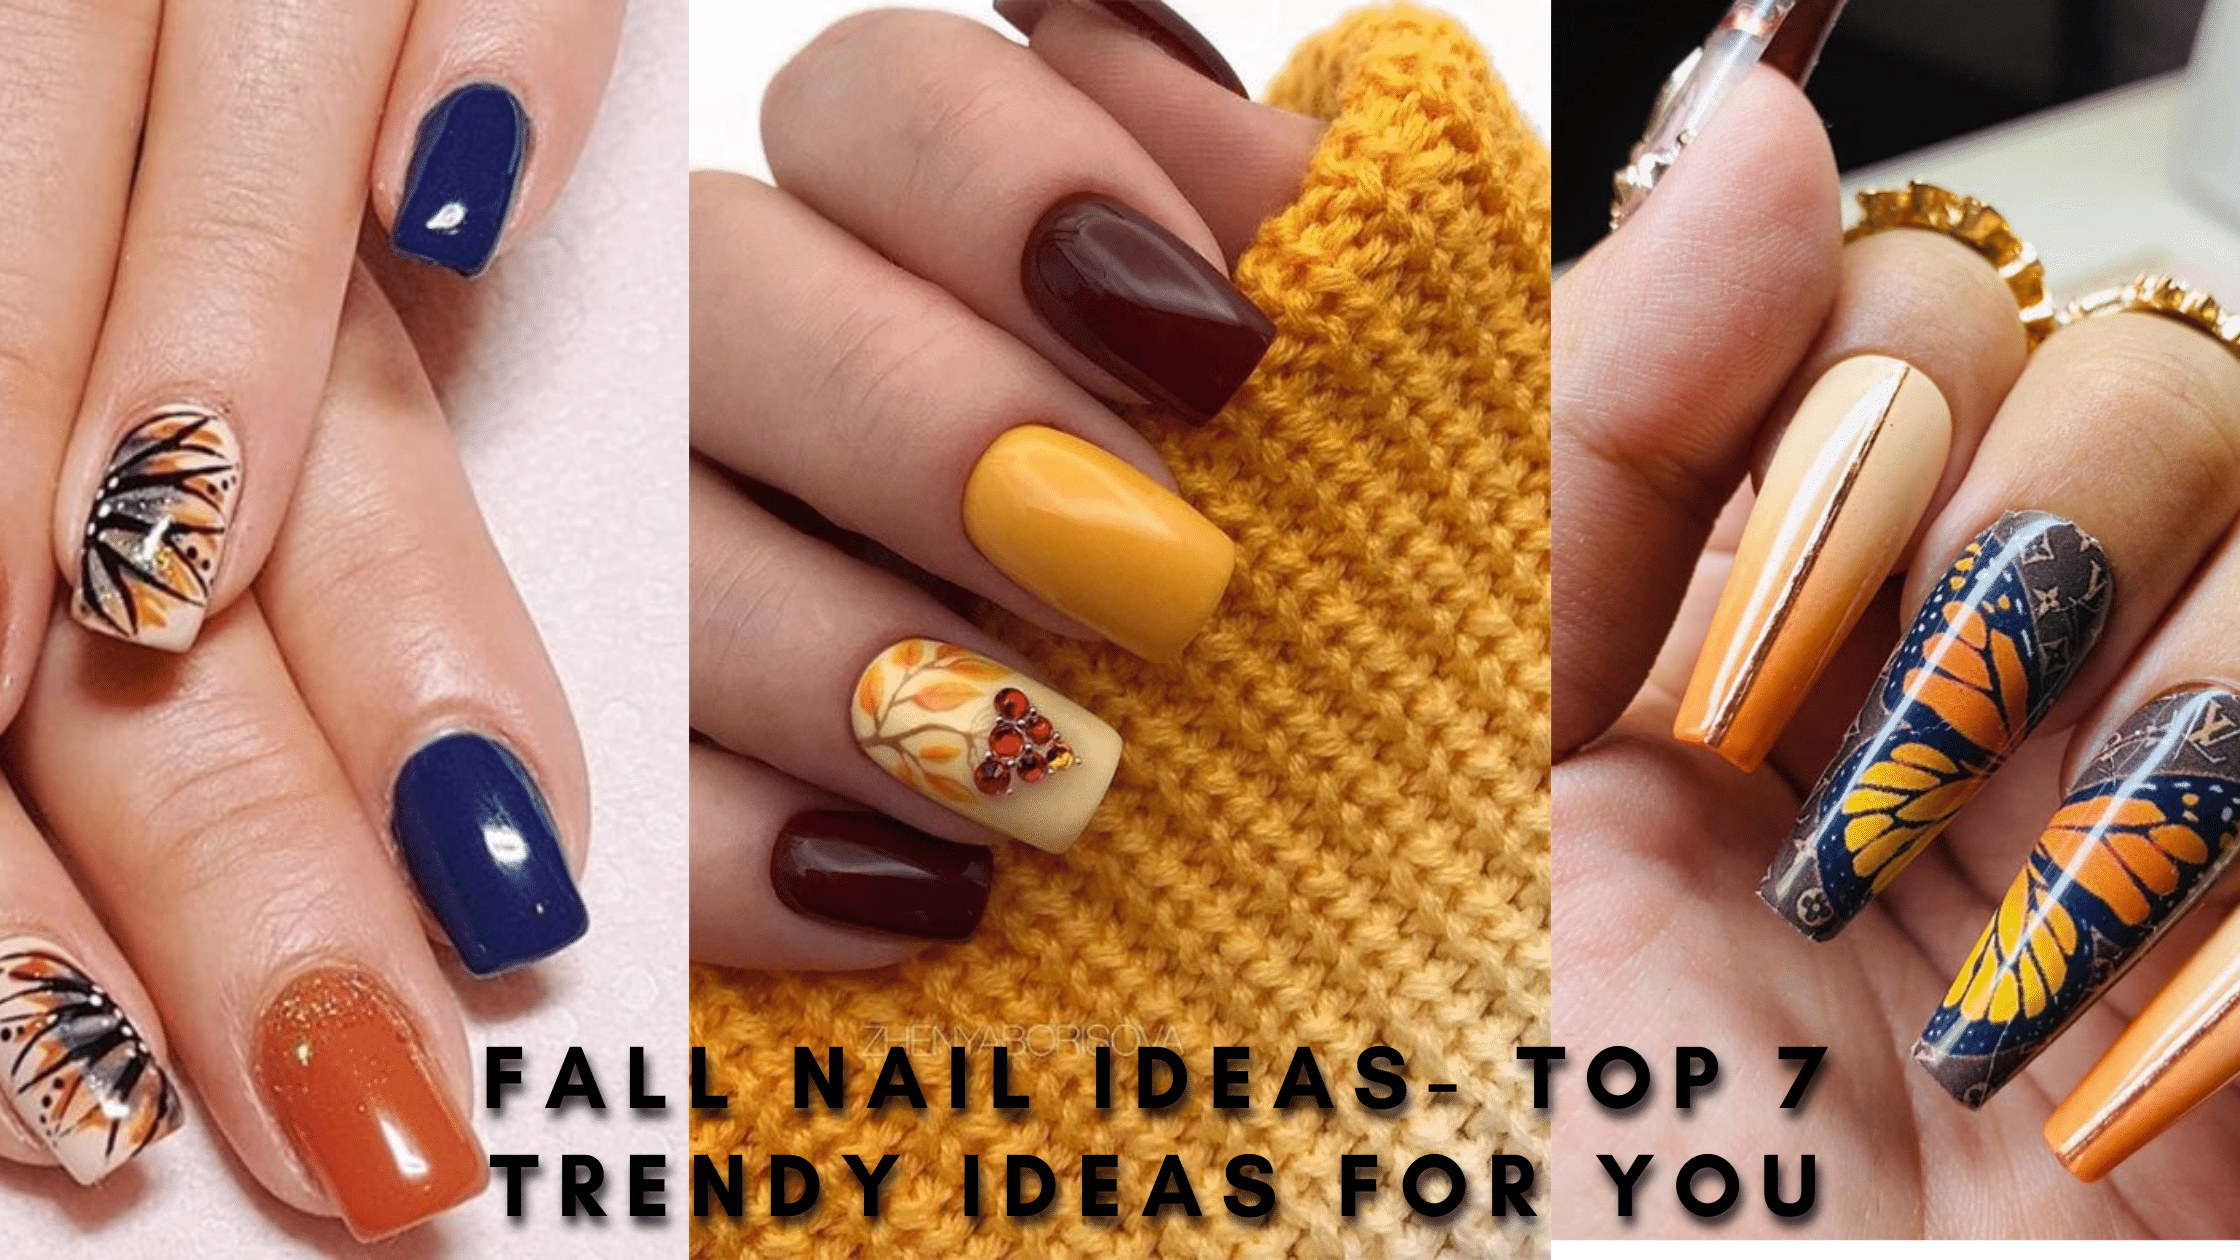 fall-nail-ideas-top-7-trendy-ideas-for-you-2